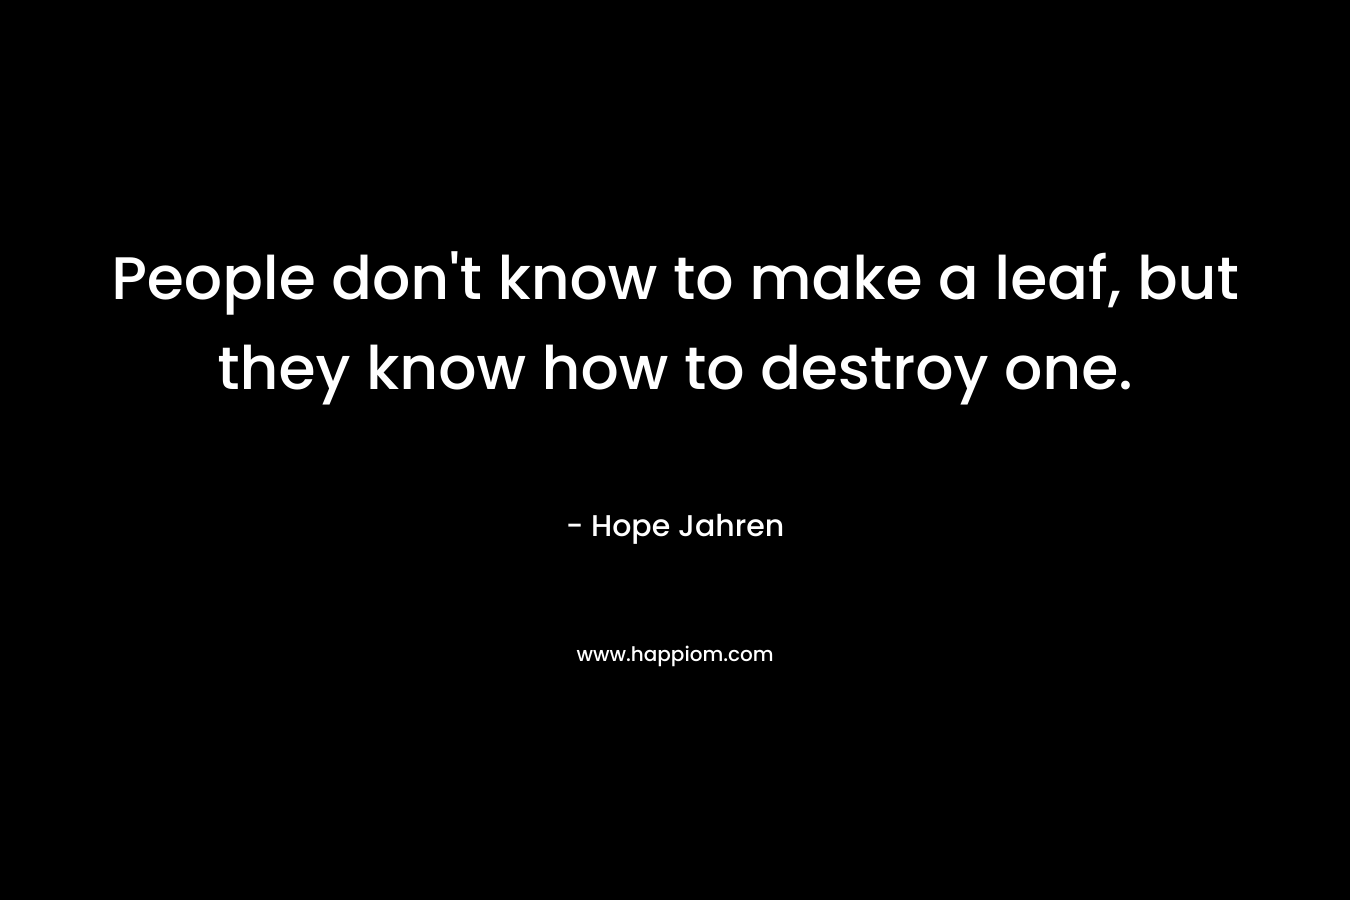 People don’t know to make a leaf, but they know how to destroy one. – Hope Jahren